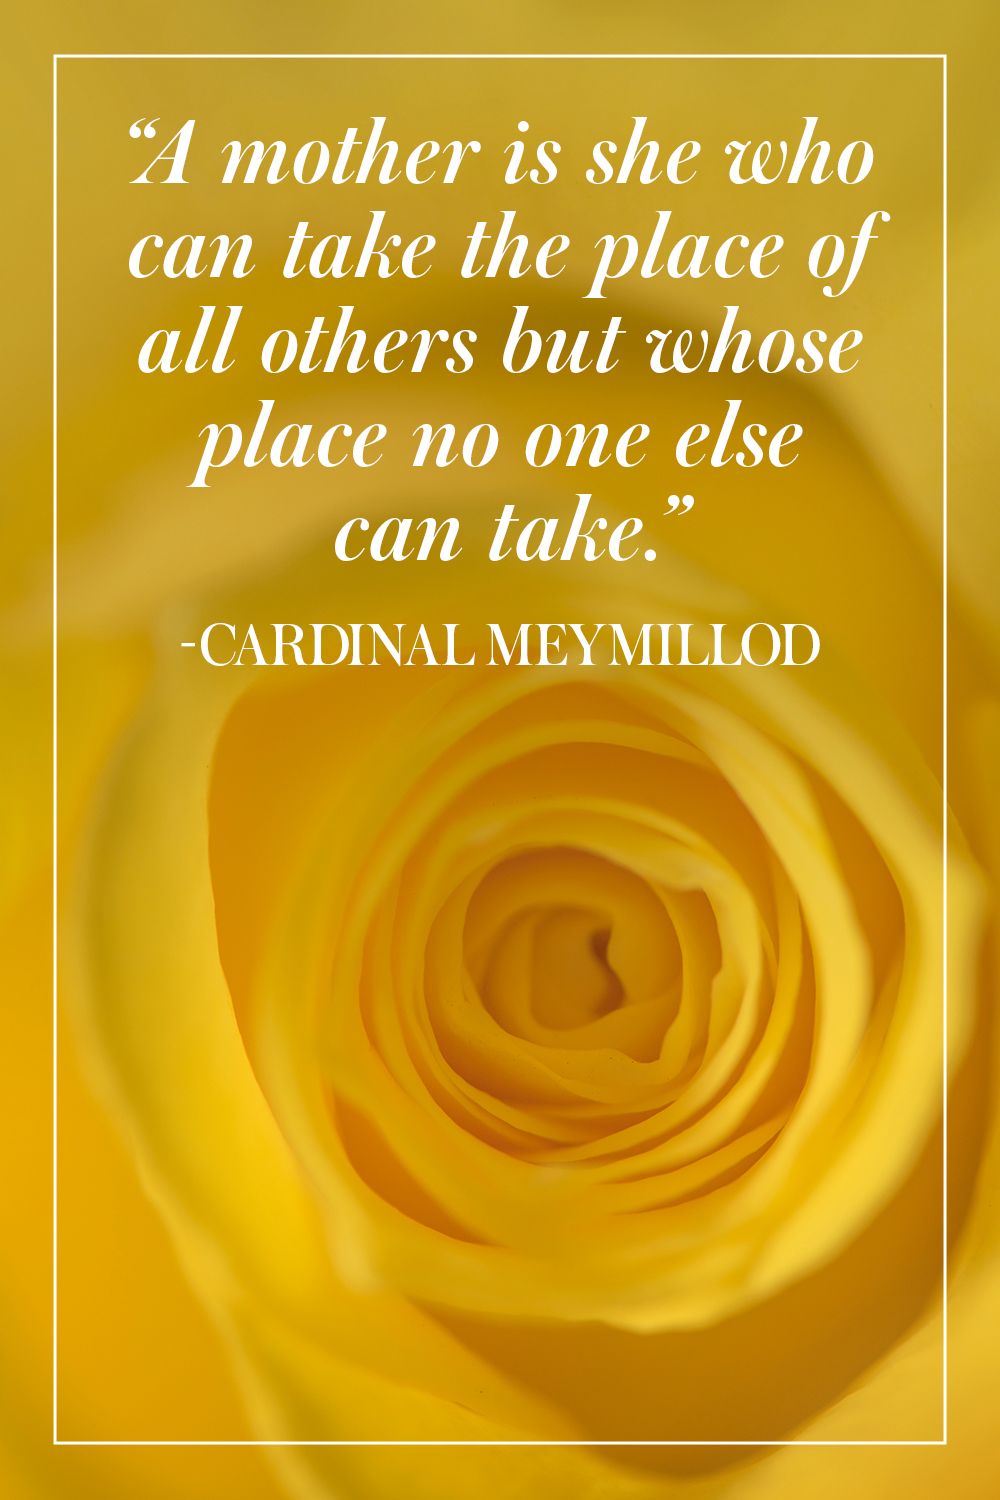 a mother is the she who can take the place of all others but whose place no one else can take. cardinal meylillod